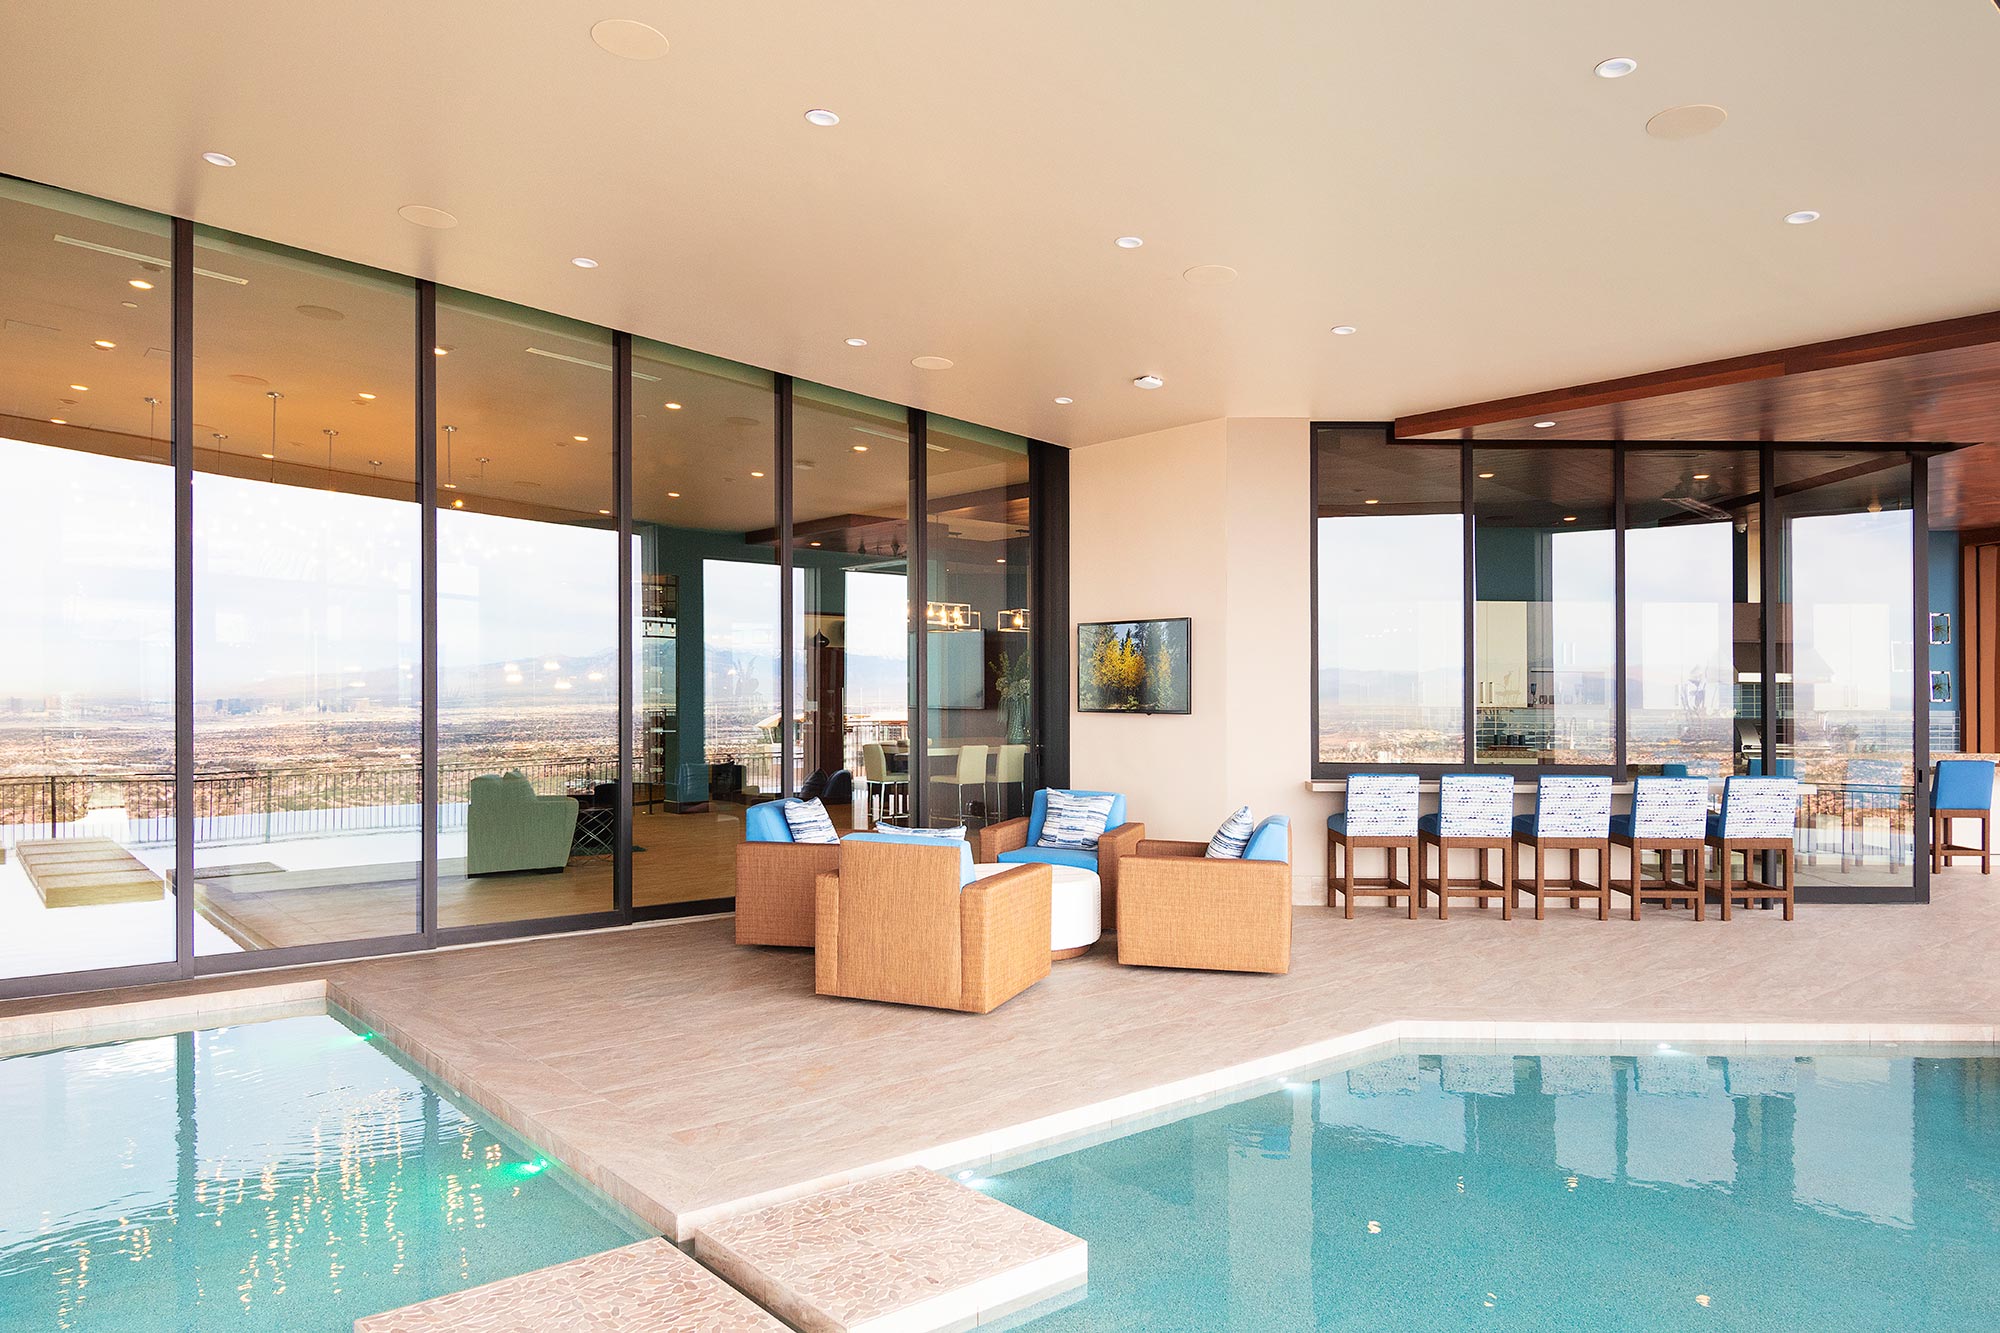 Massive glass walls connect the home to the pool and patio.